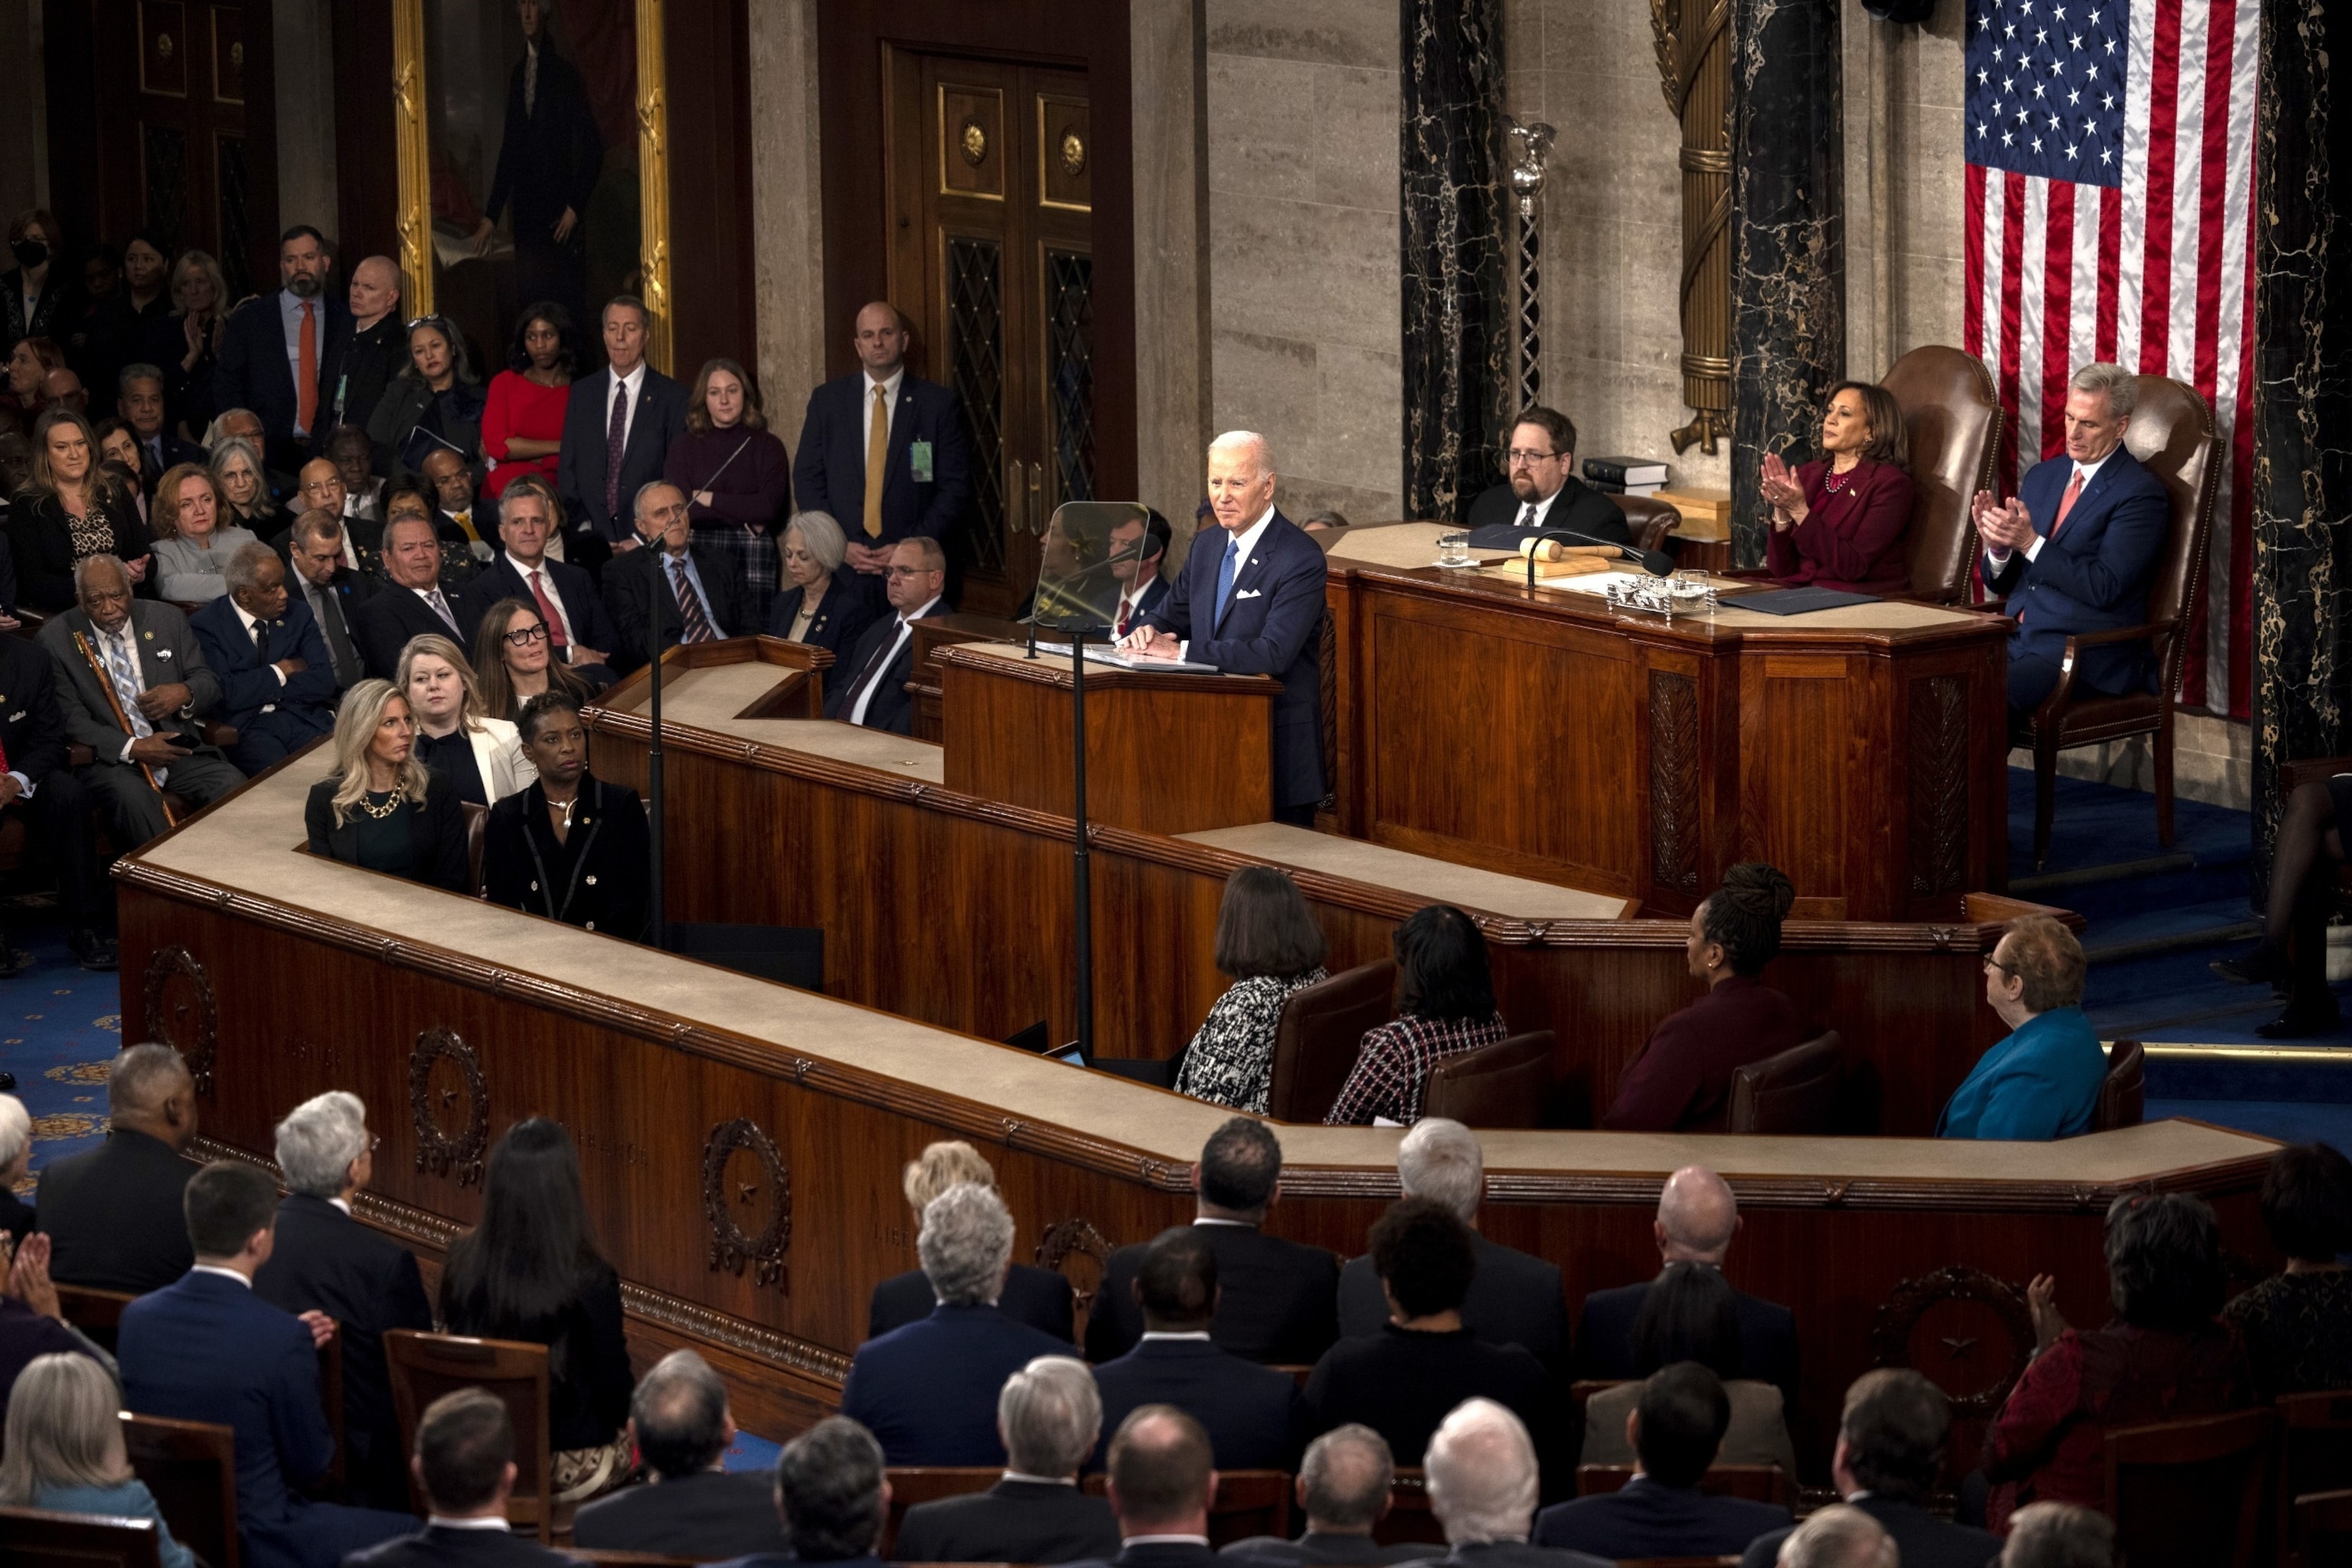 PHOTO: President Joe Biden speaks to Congress during his State of The Union address on February 7, 2023 in Washington, DC.